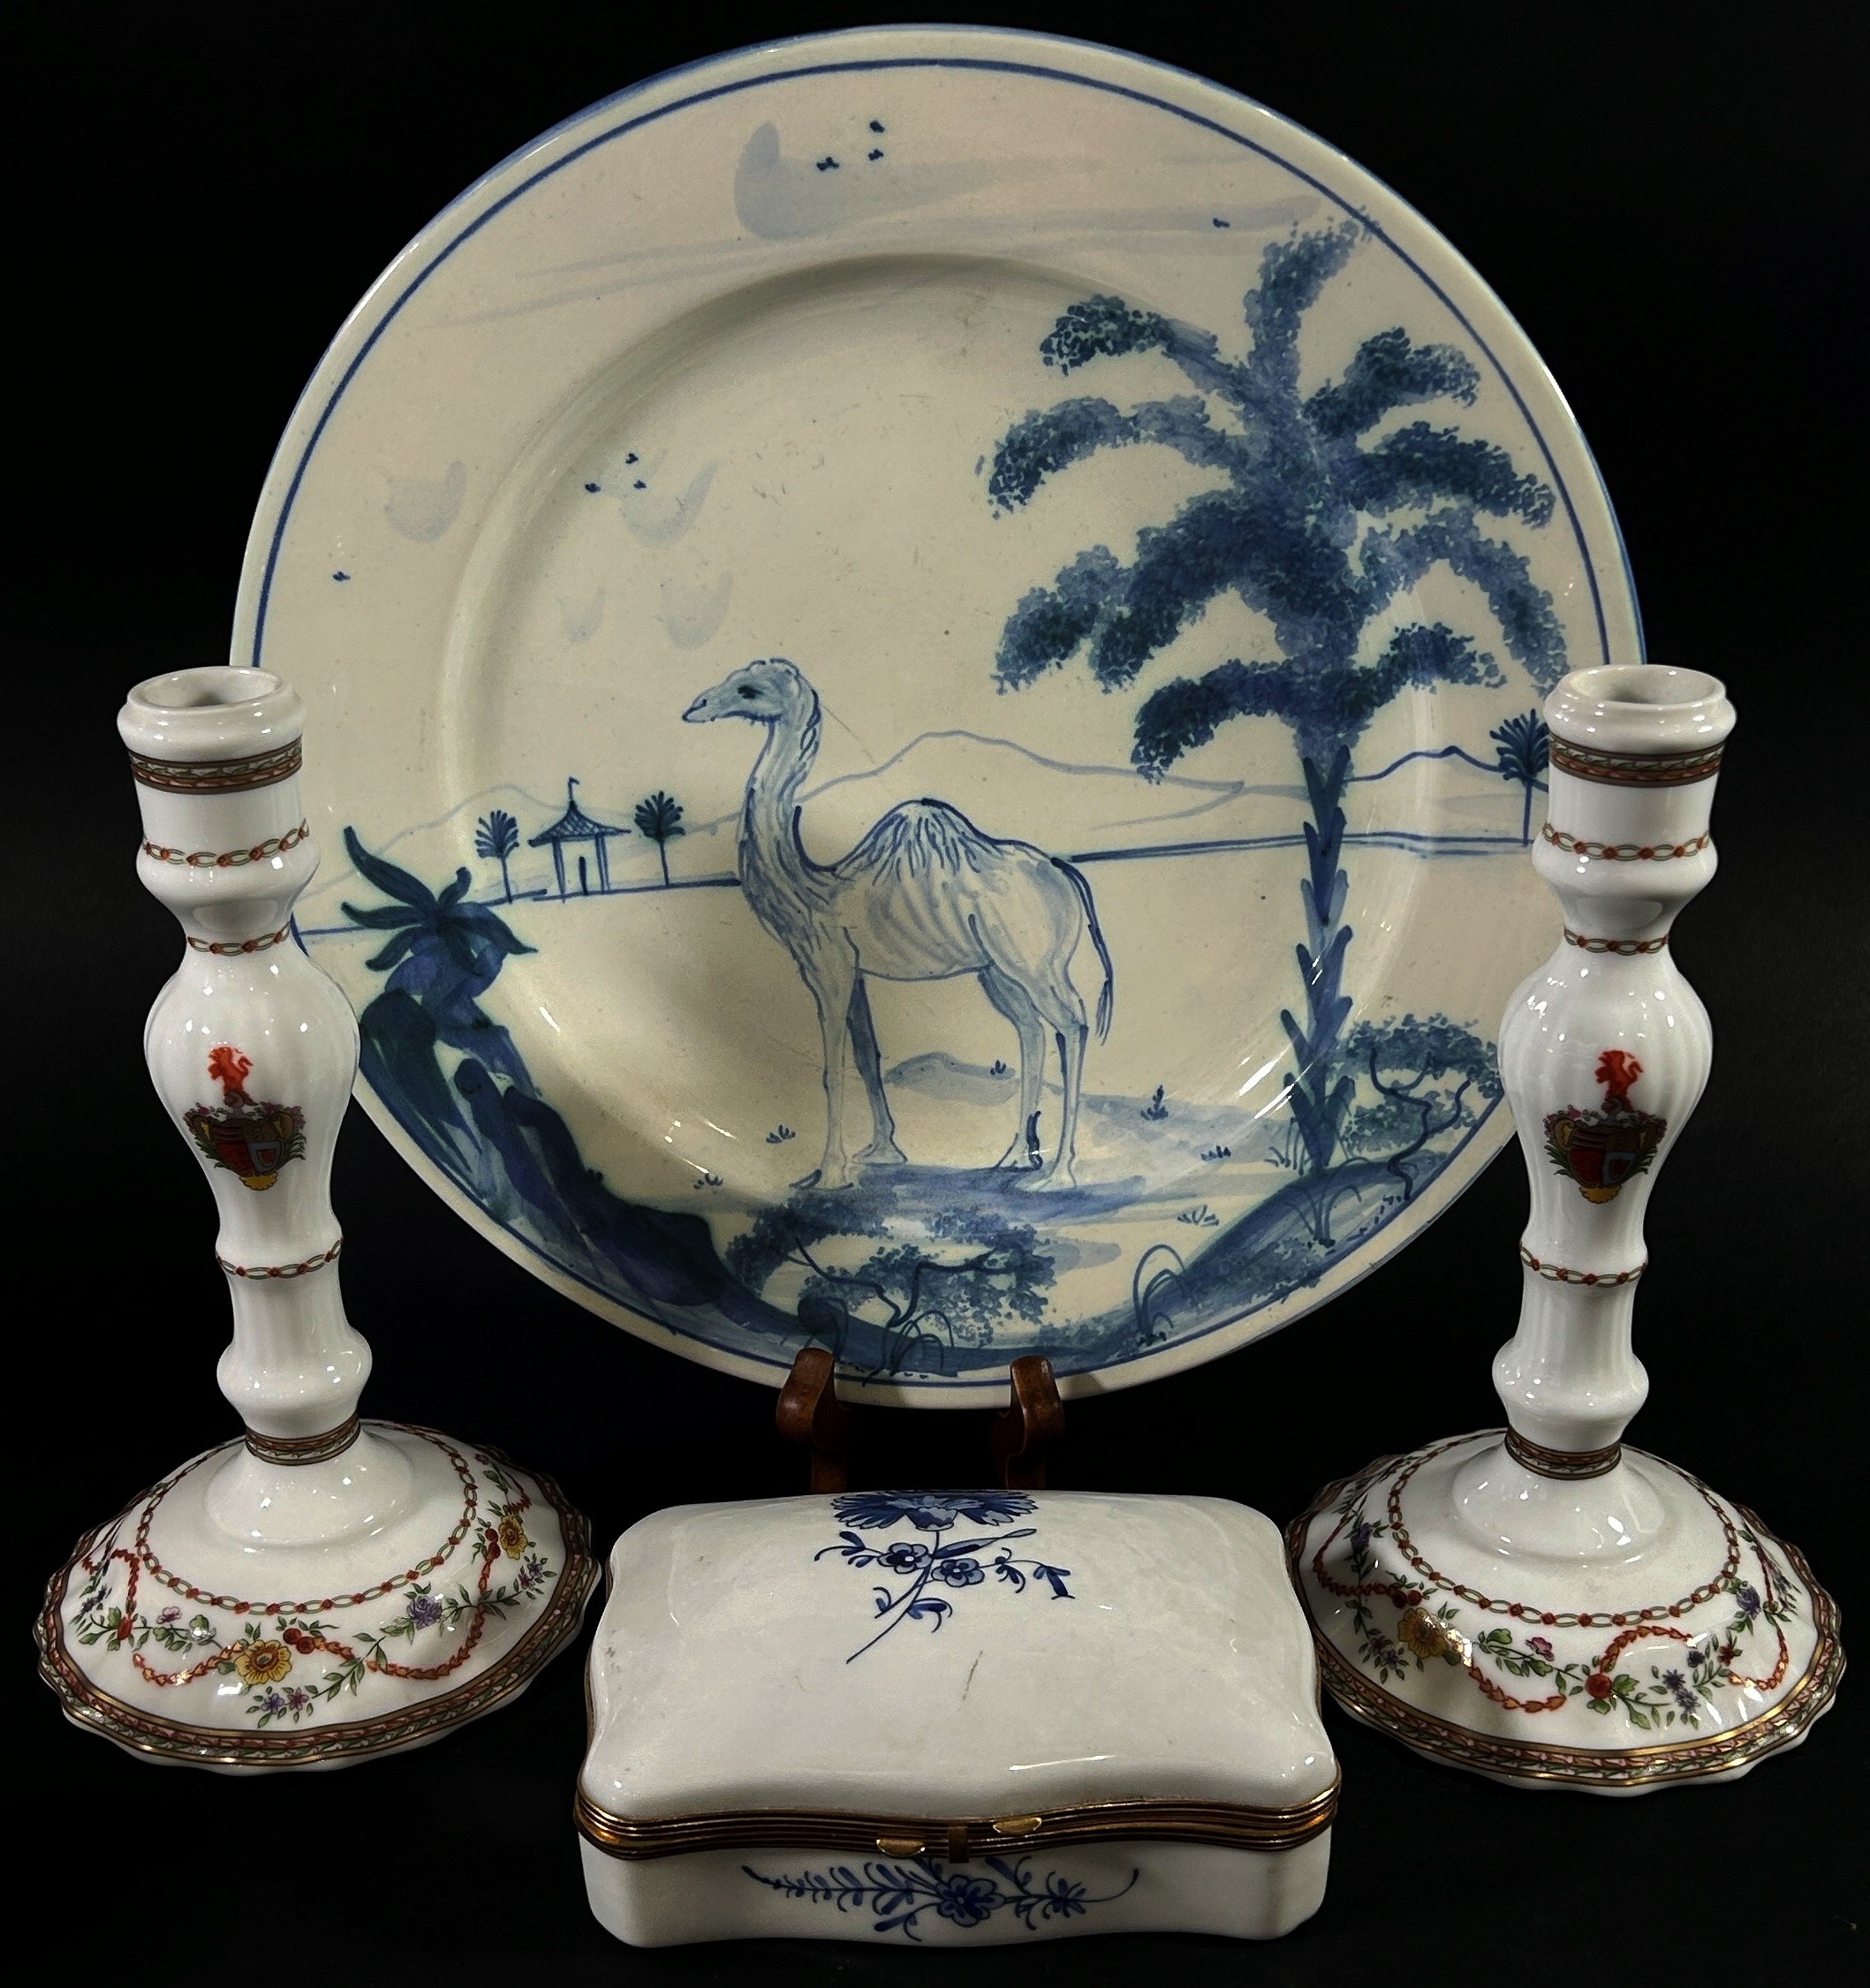 A hand-painted blue and white plate showing a camel in landscape for Coalfax and Fowler, a pair of